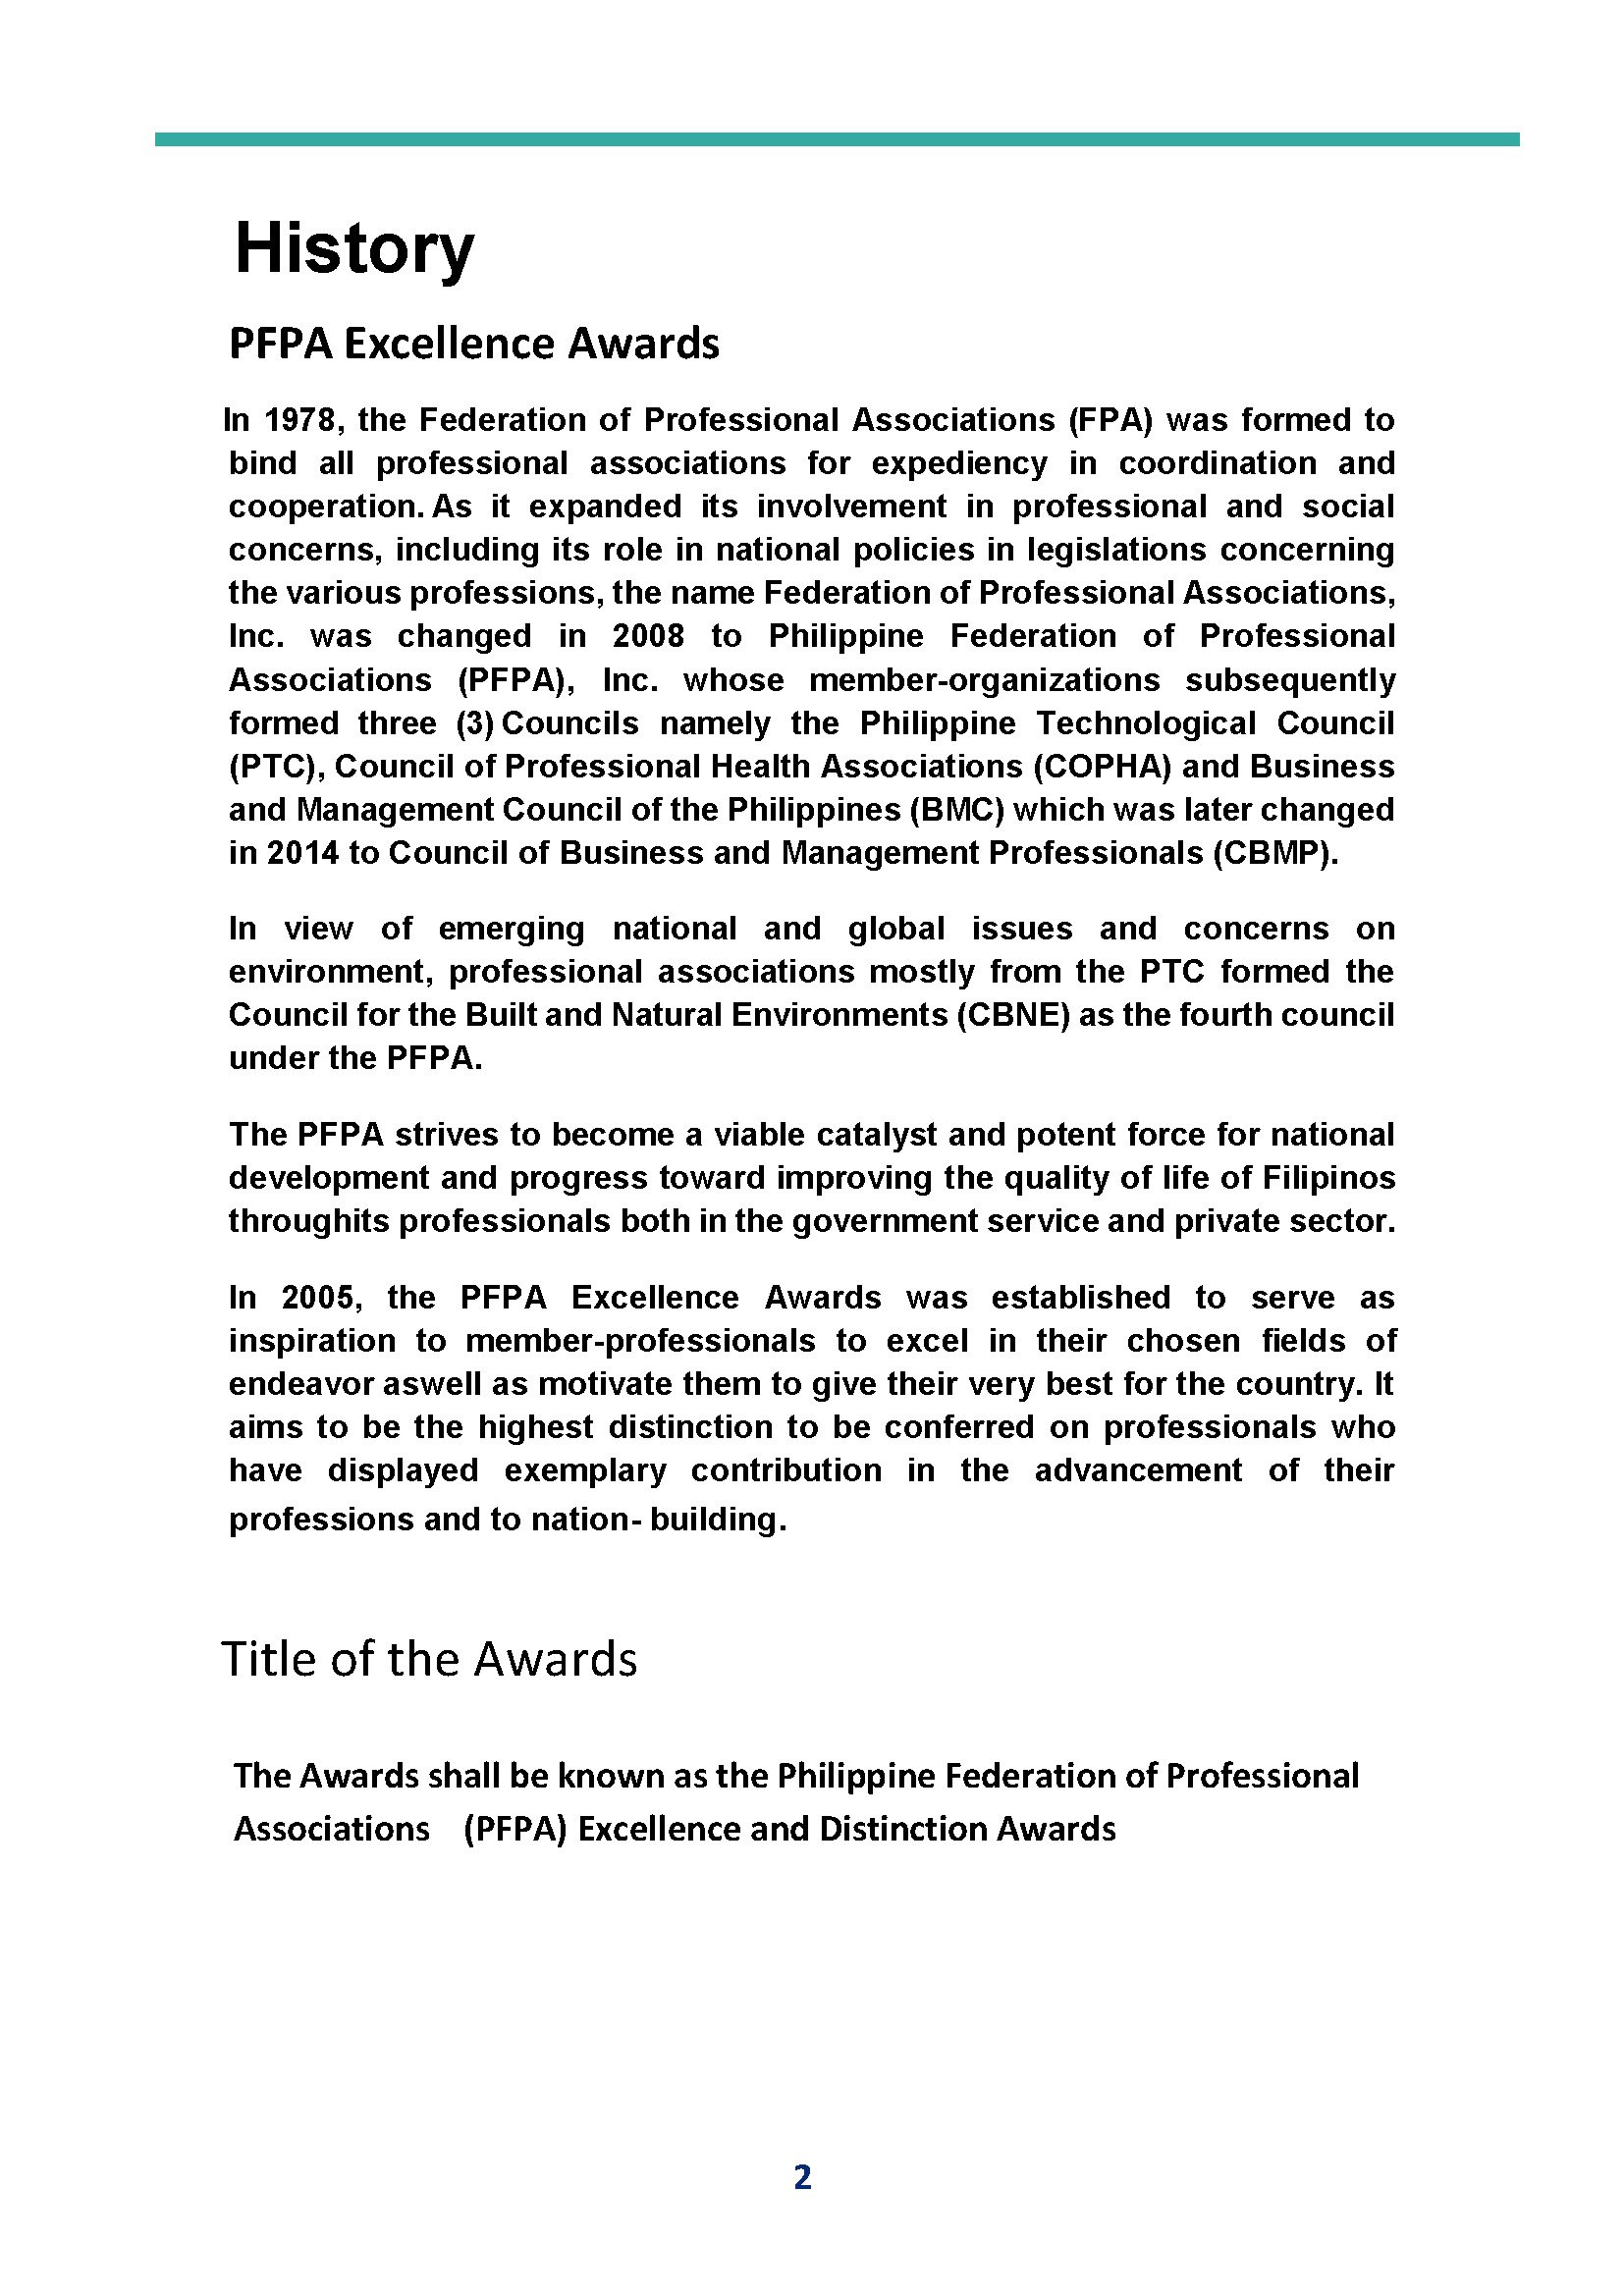 PFPA-Excellence-Awards-Guidelines-new (1)_Page_02.jpg